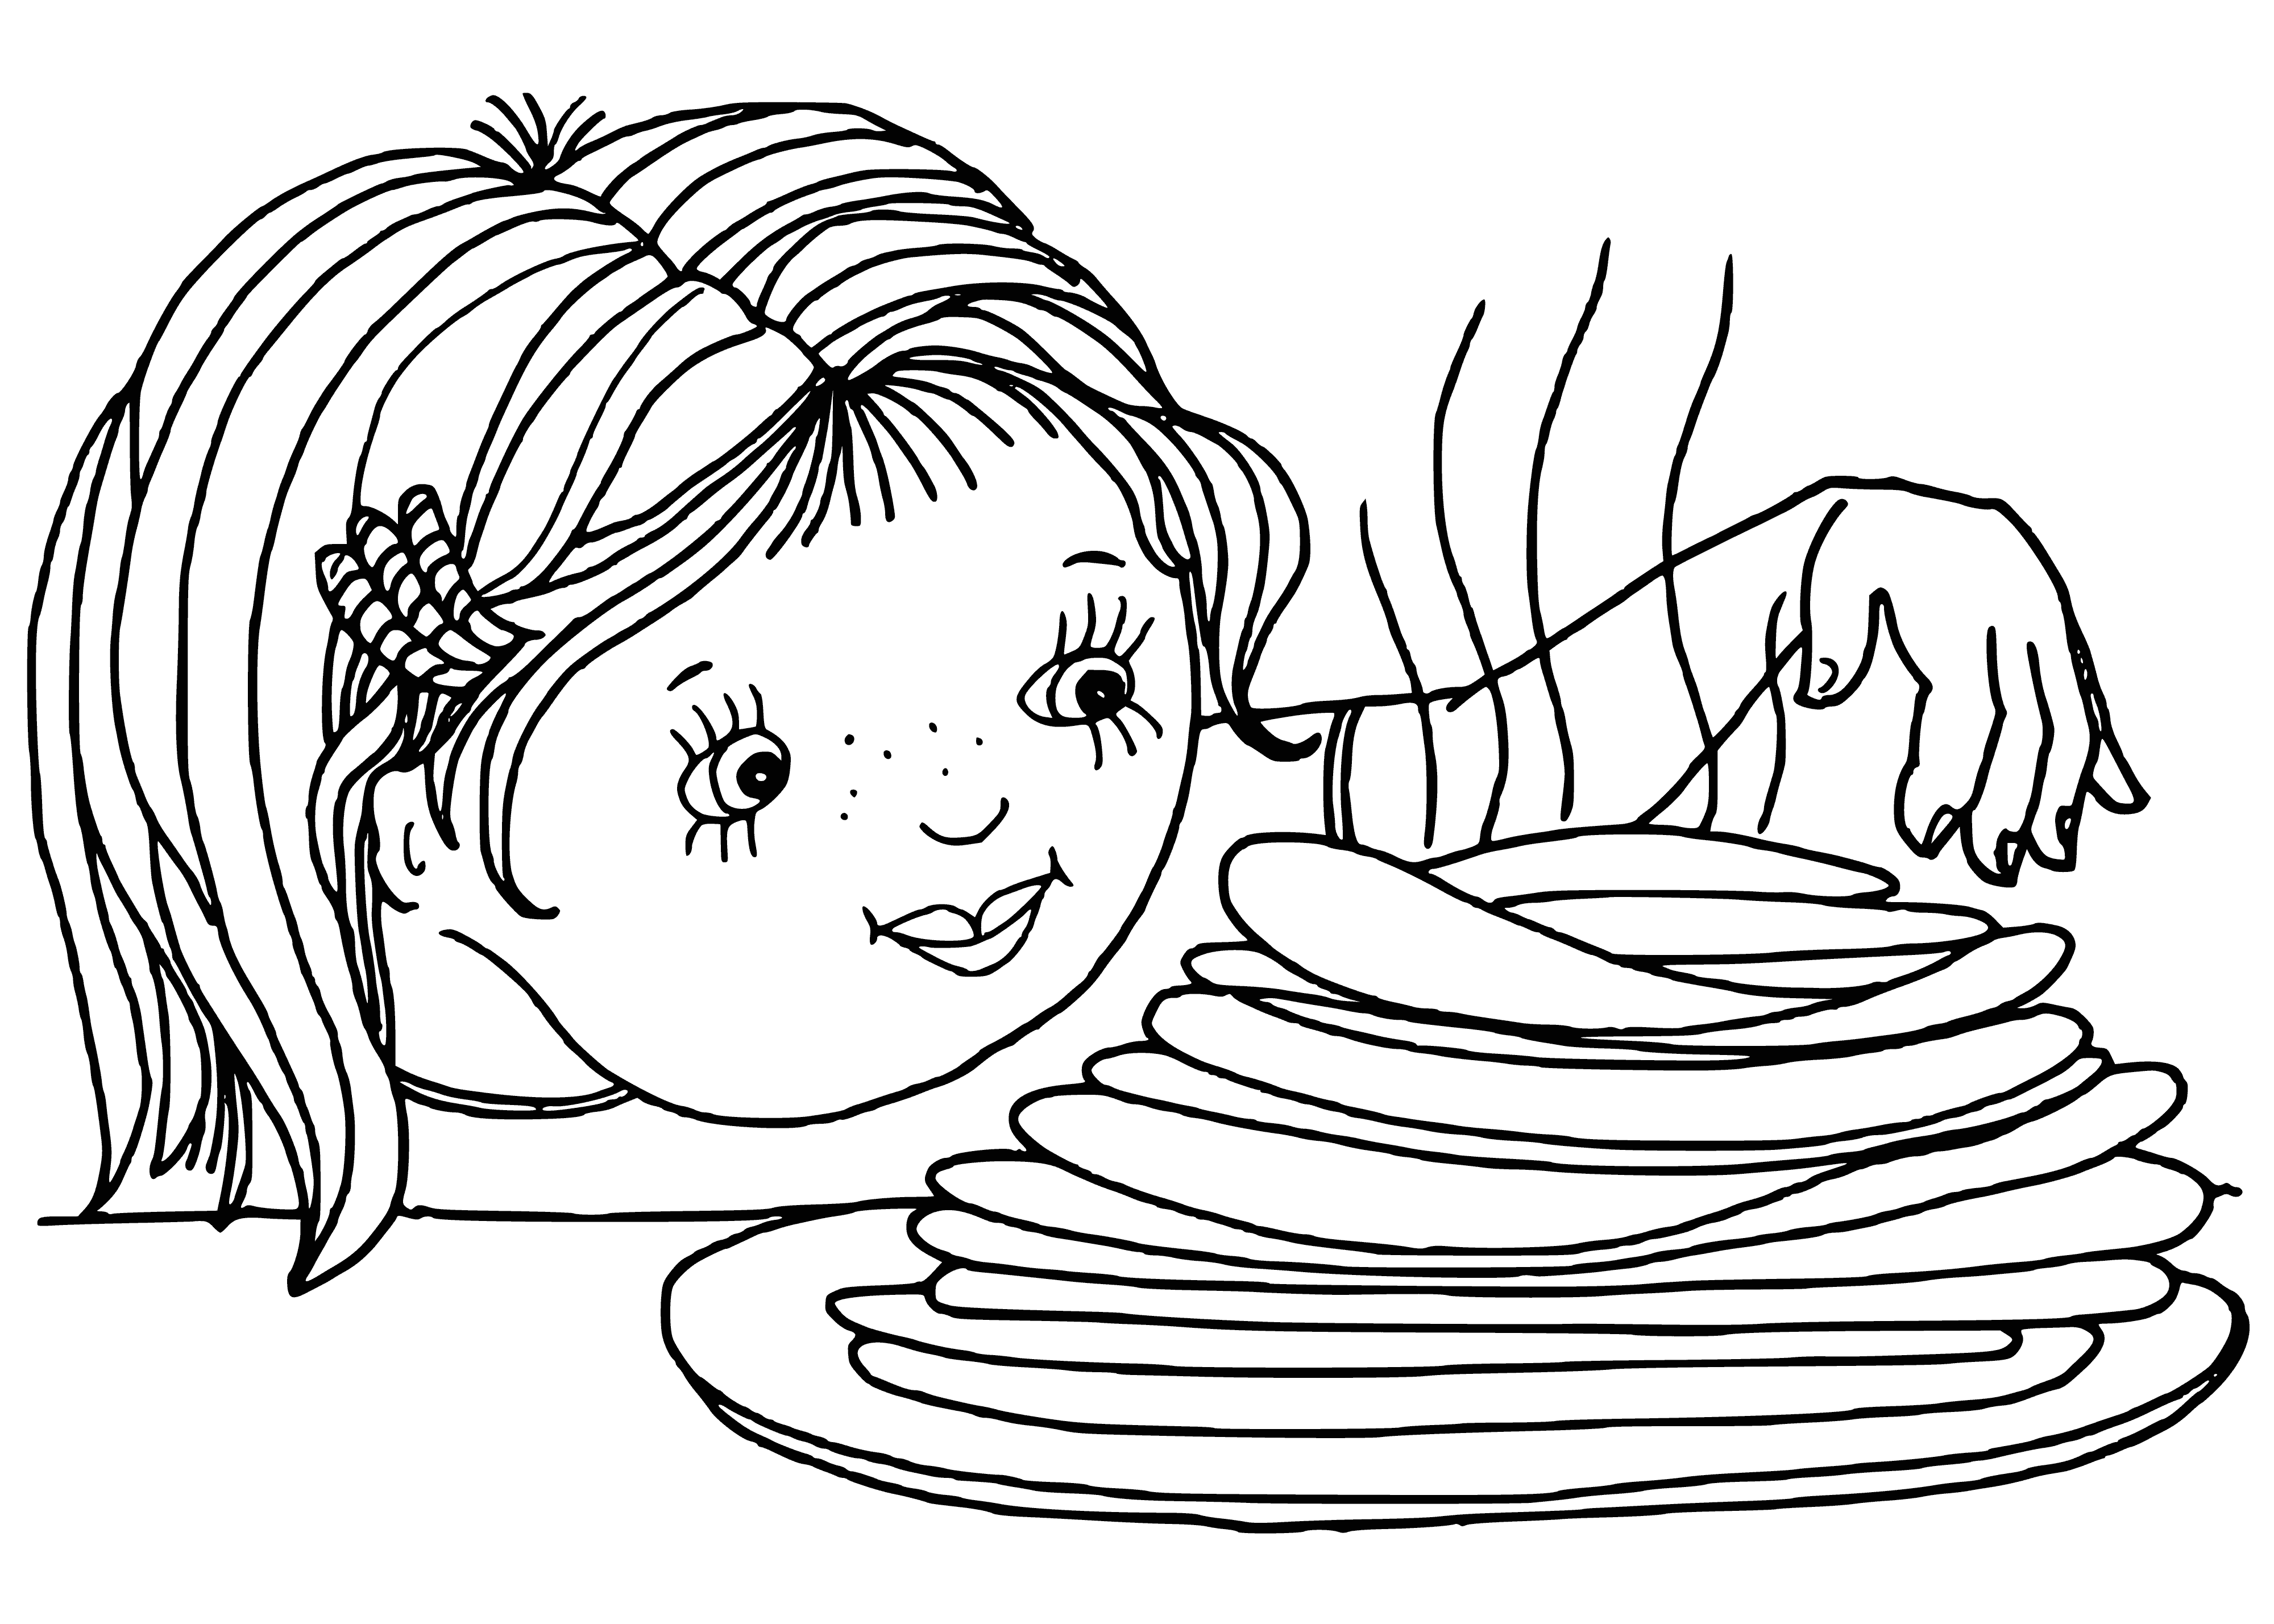 coloring page: Pancakes with creamy butter melting on top, ready to eat with a fork and knife. Golden brown and creamy white.